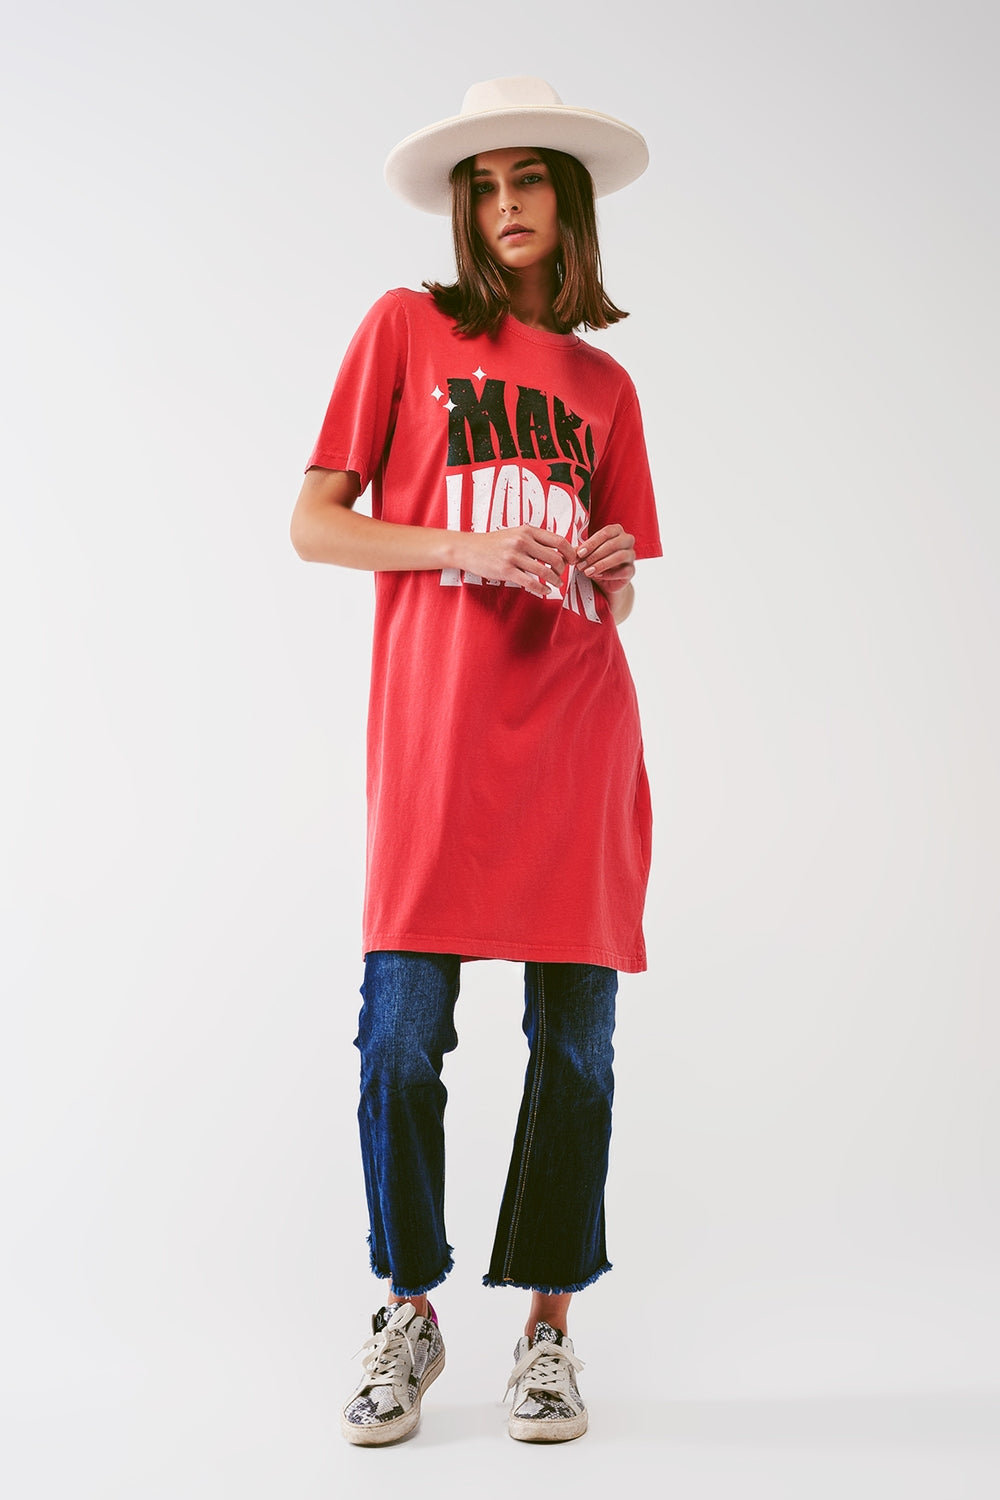 T-Shirt Dress With Make It Happen Text in Red